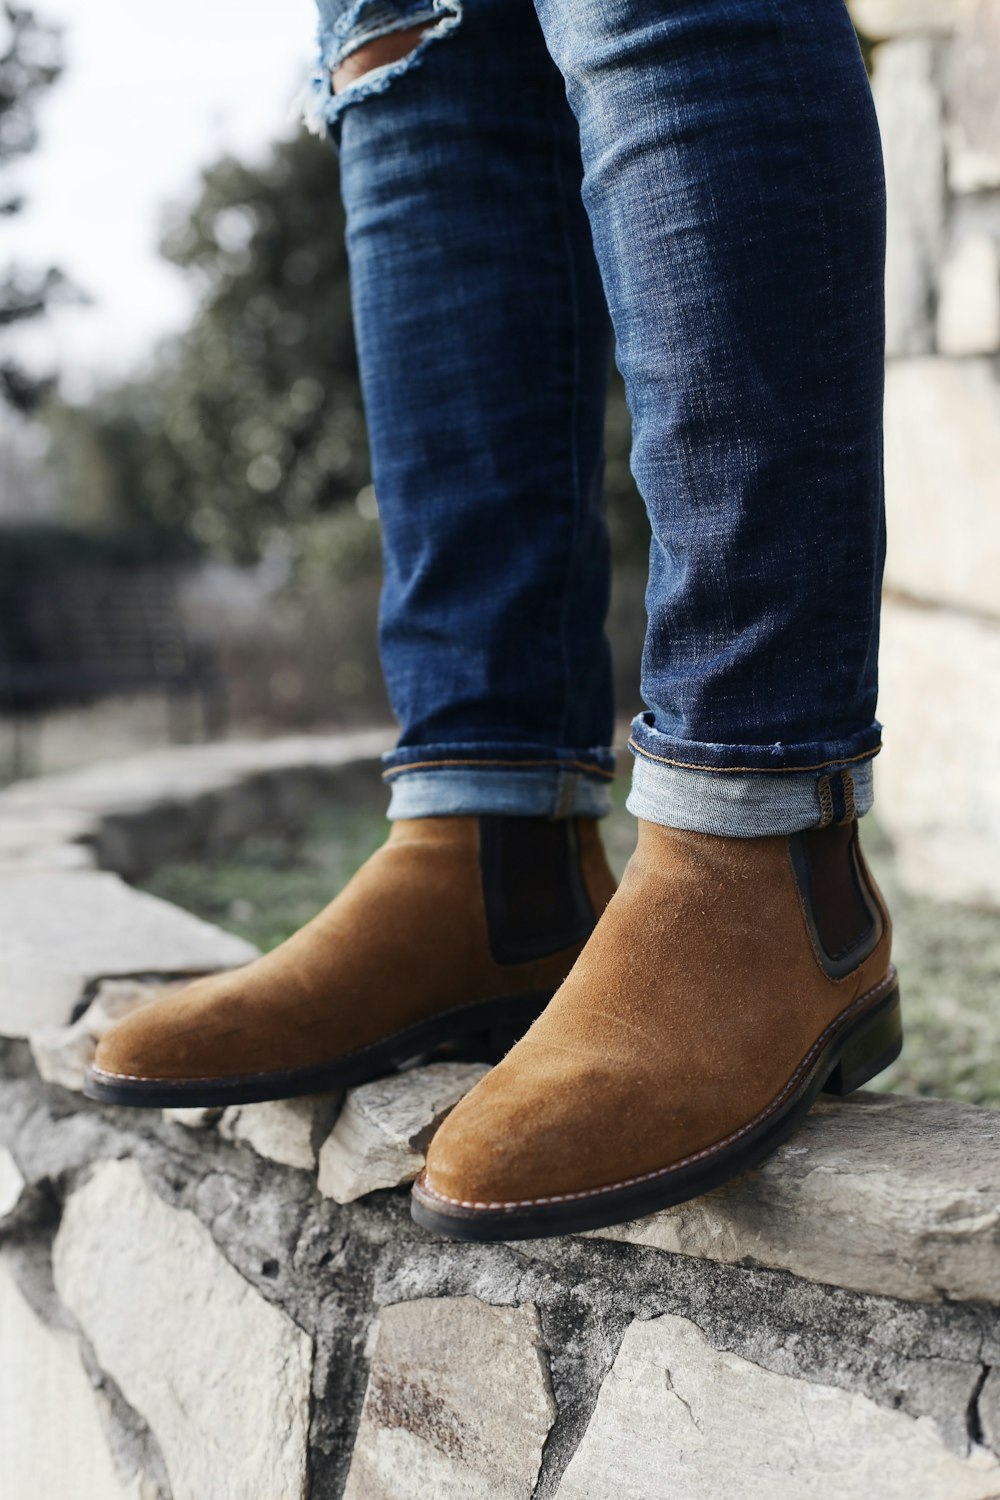 person wearing pair of brown Chelsea boots